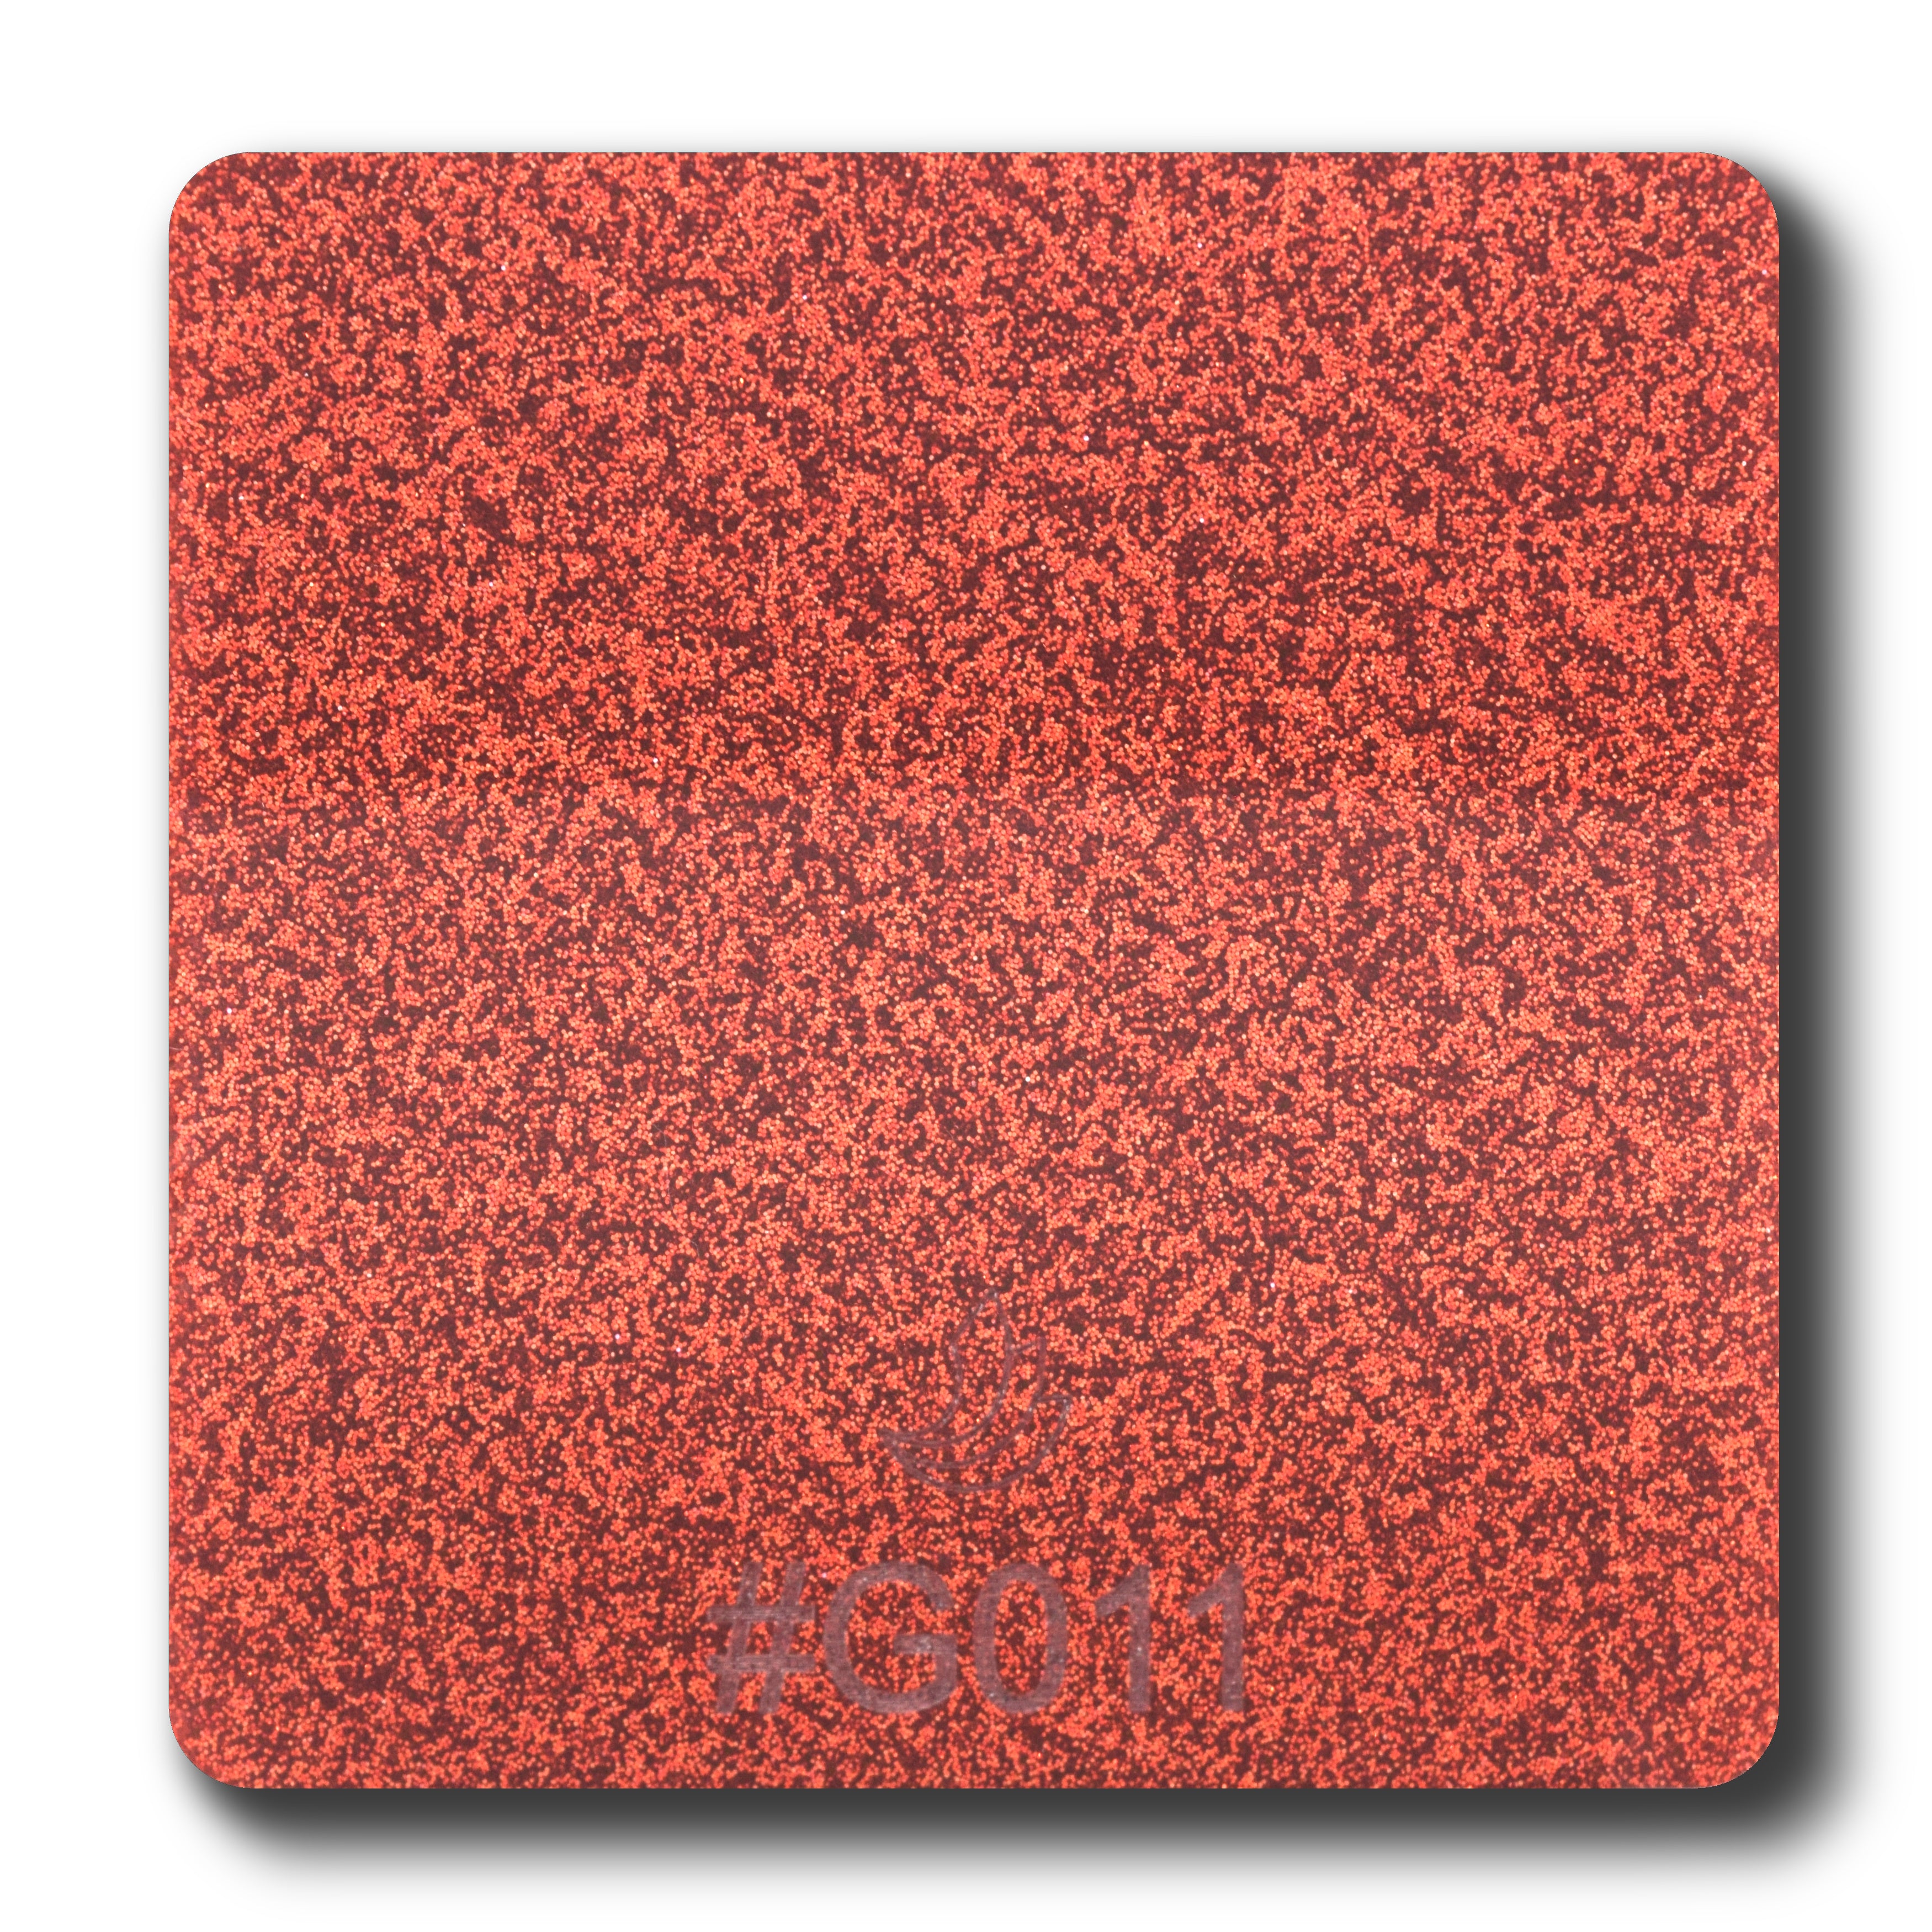 1/8" Red Glitter Two-Sided Acrylic Sheet